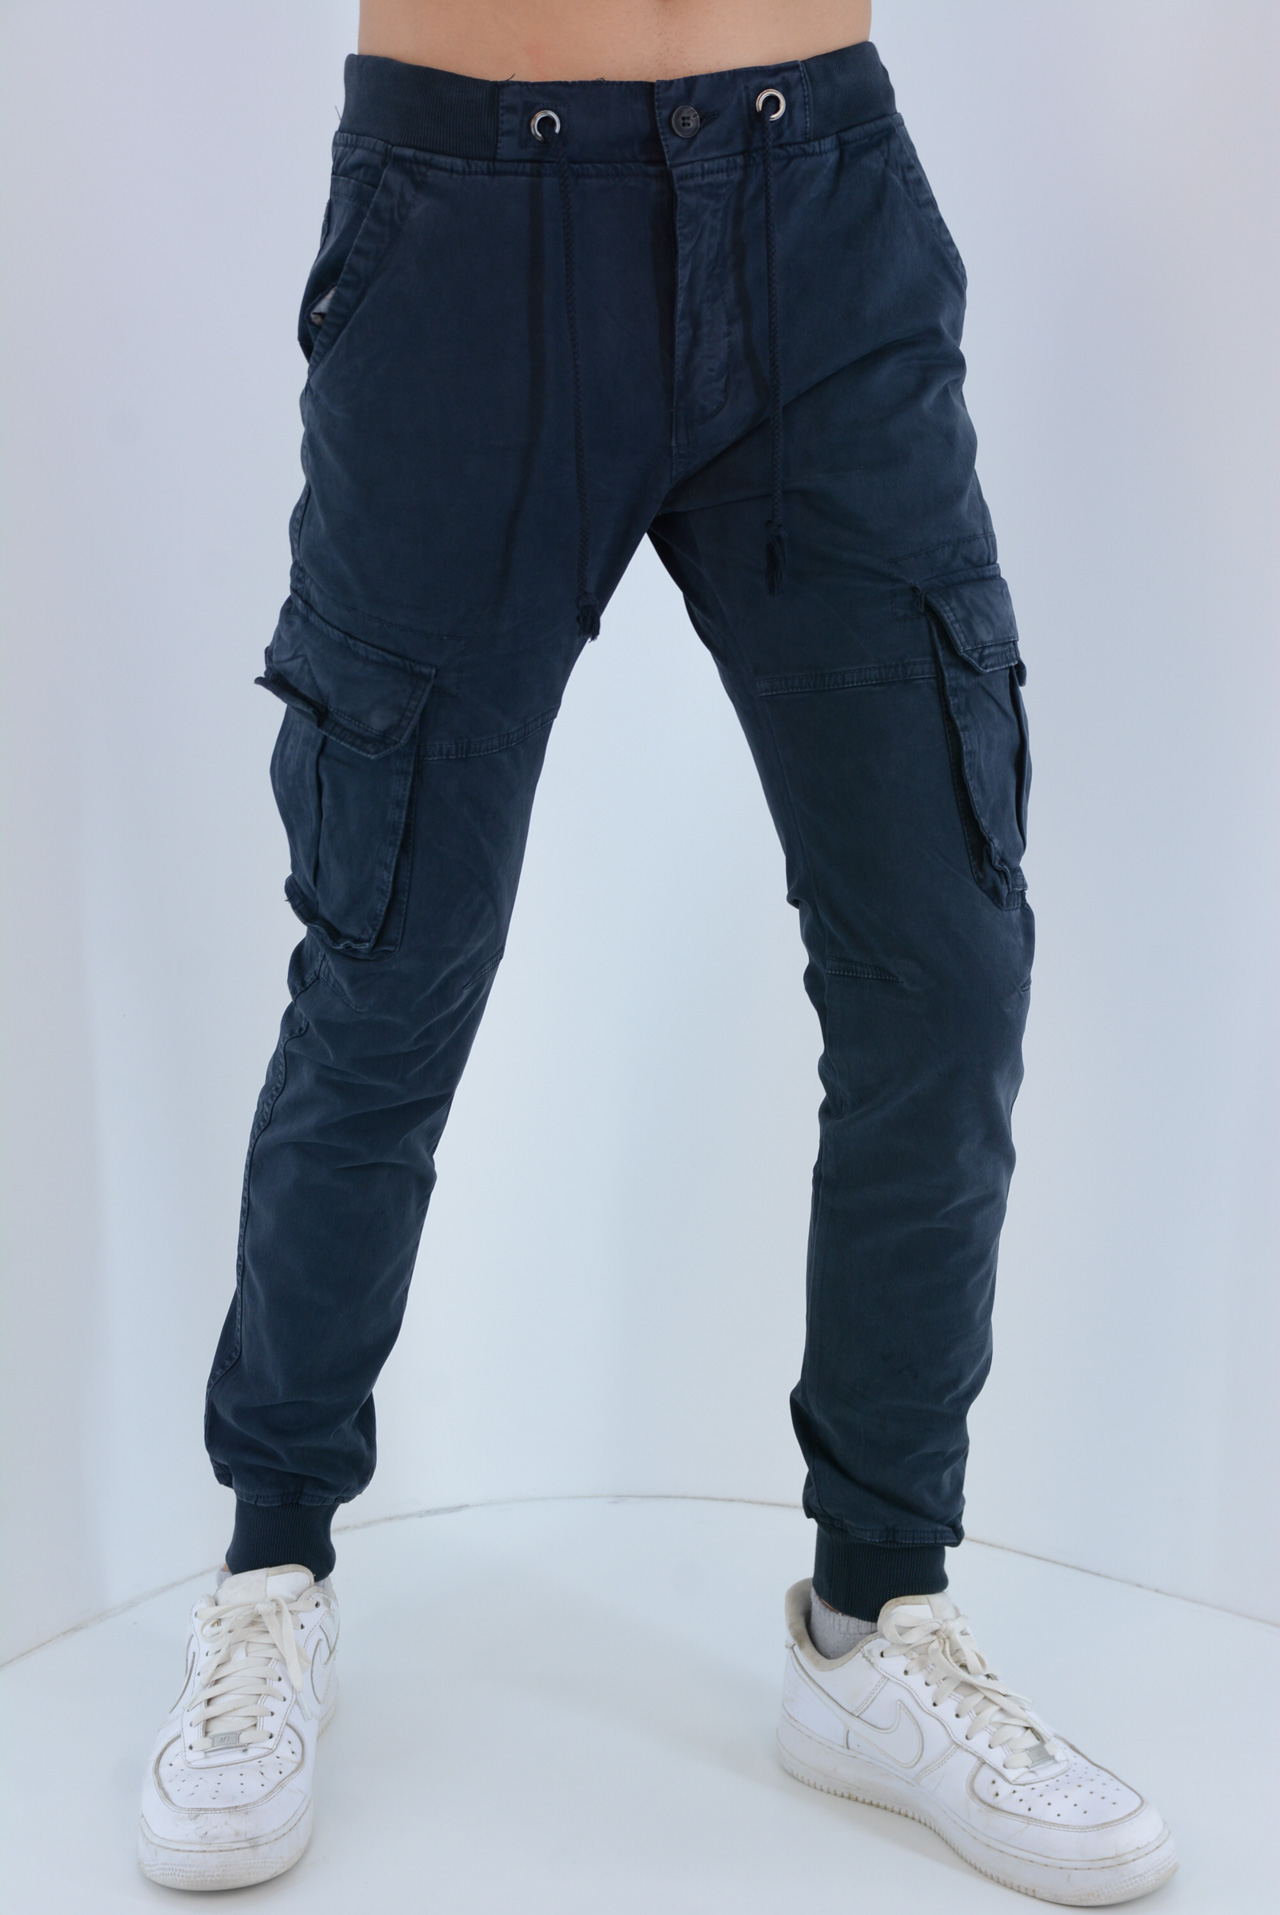 Cargo pants male code 2155-3 front view